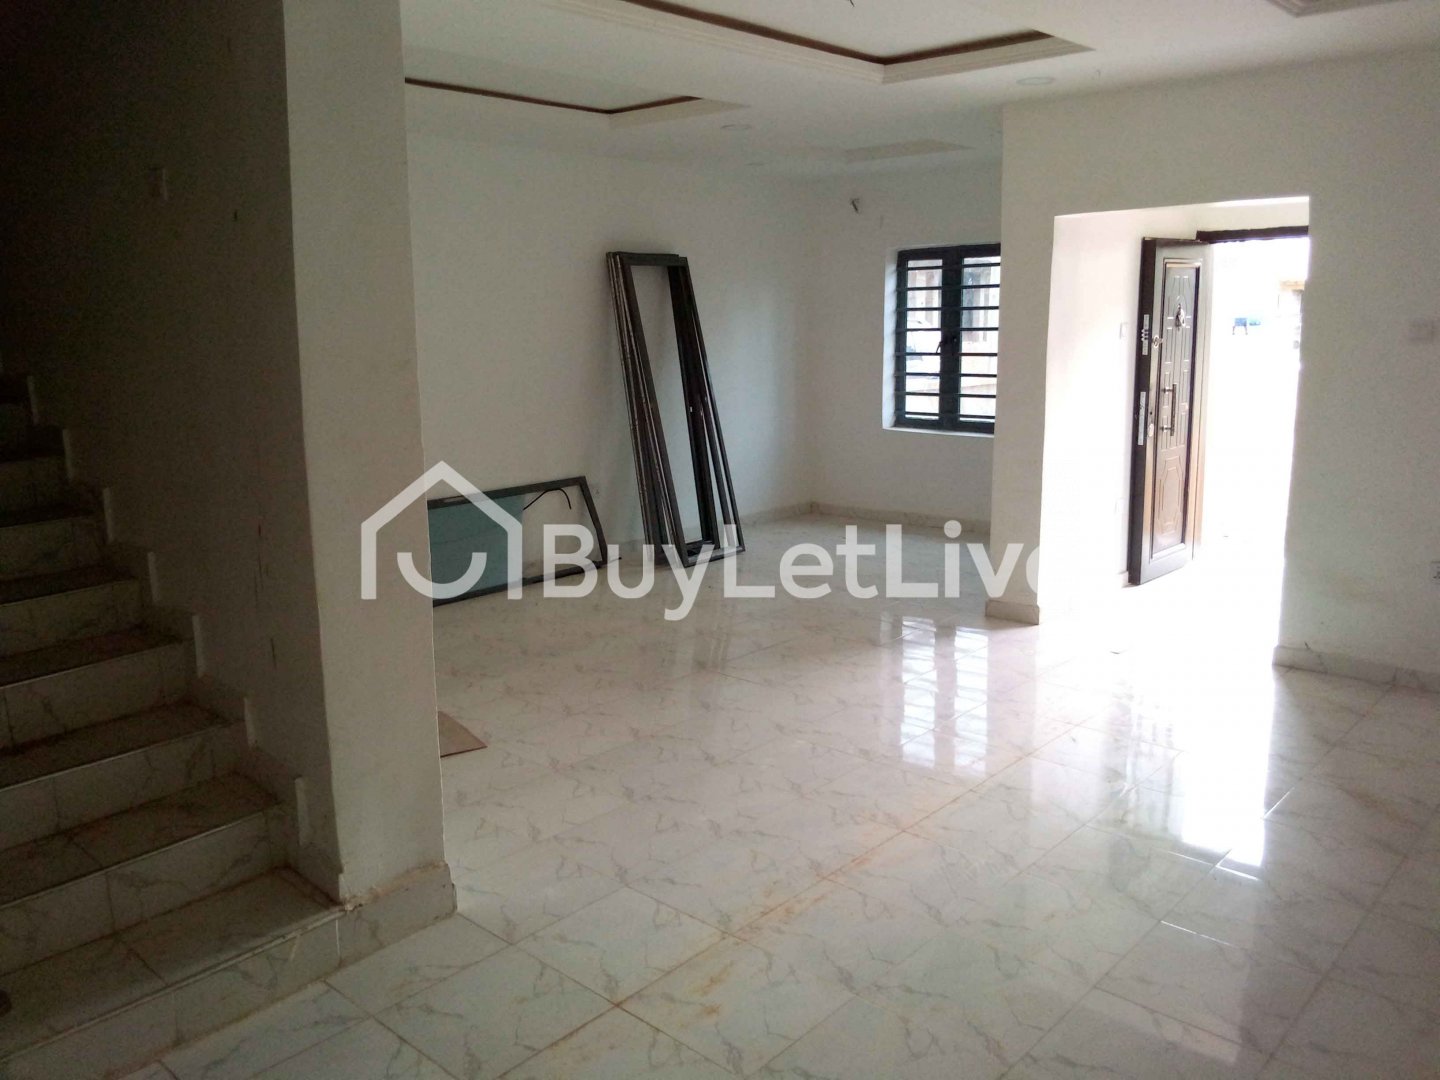 4 bedrooms Terraced Duplex for sale at Arepo